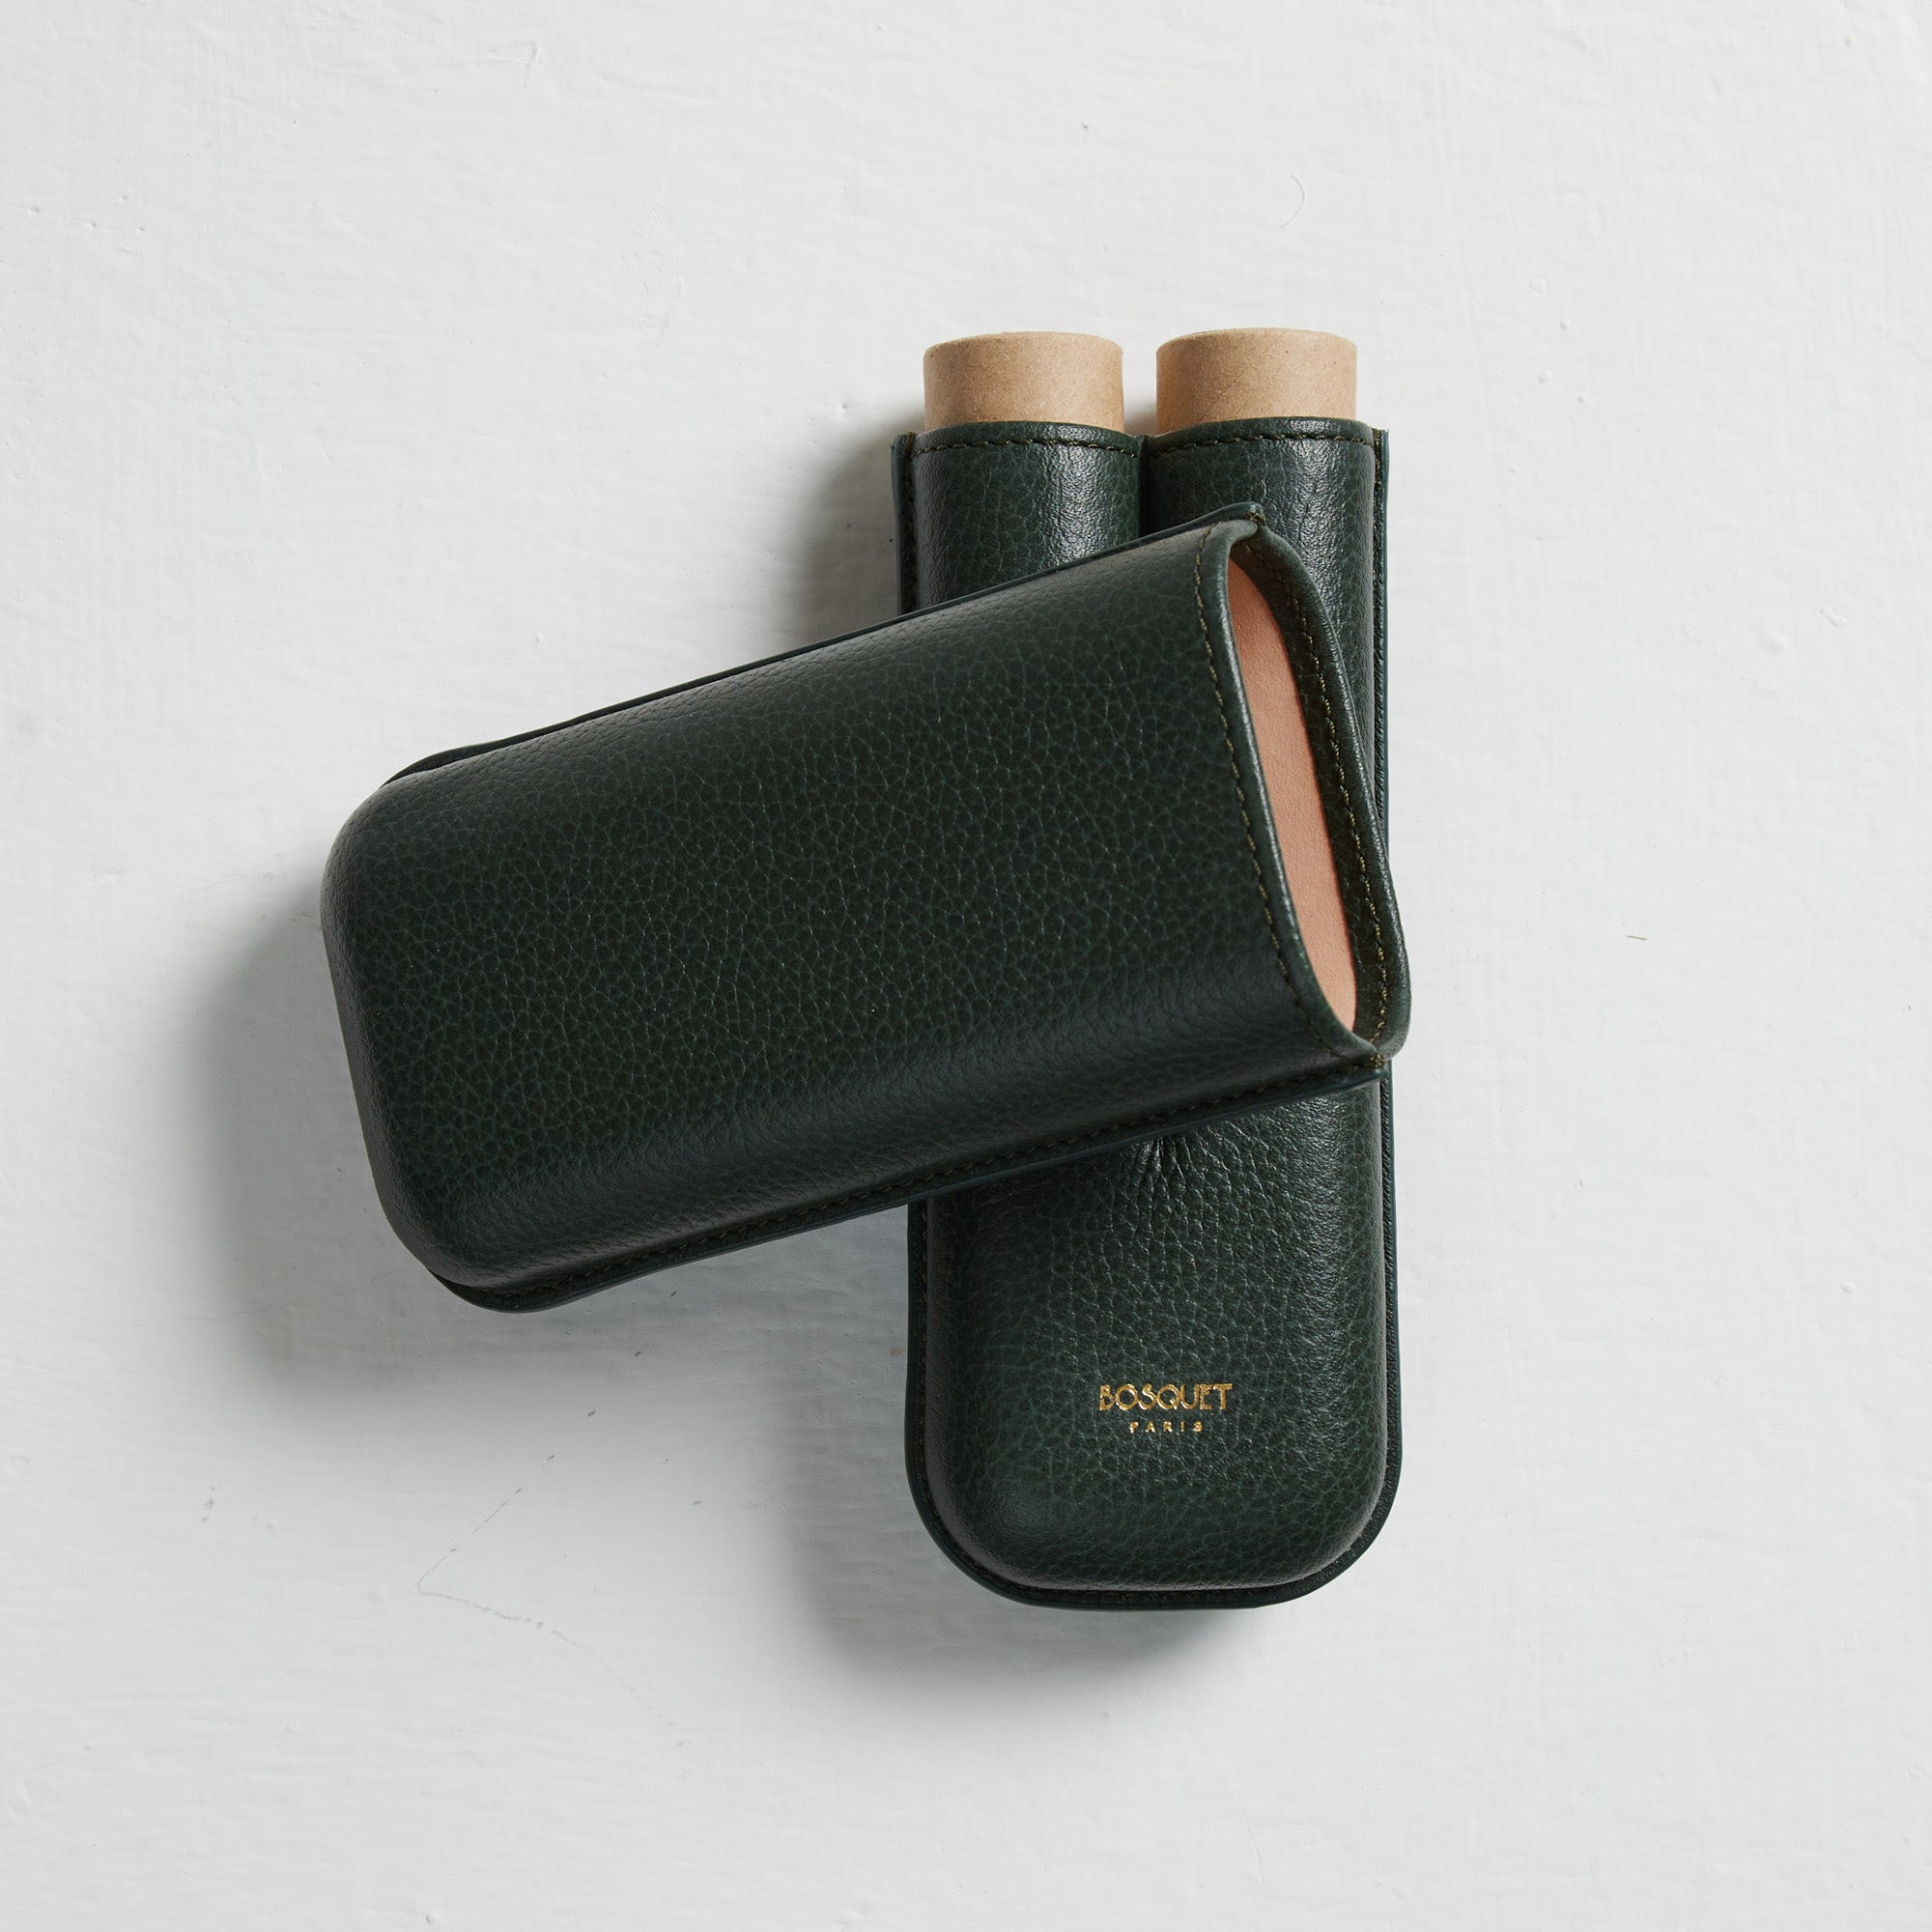 Two Bosque Smooth Forest Green Leather Cigar Cases on a white surface for transporting cigars.